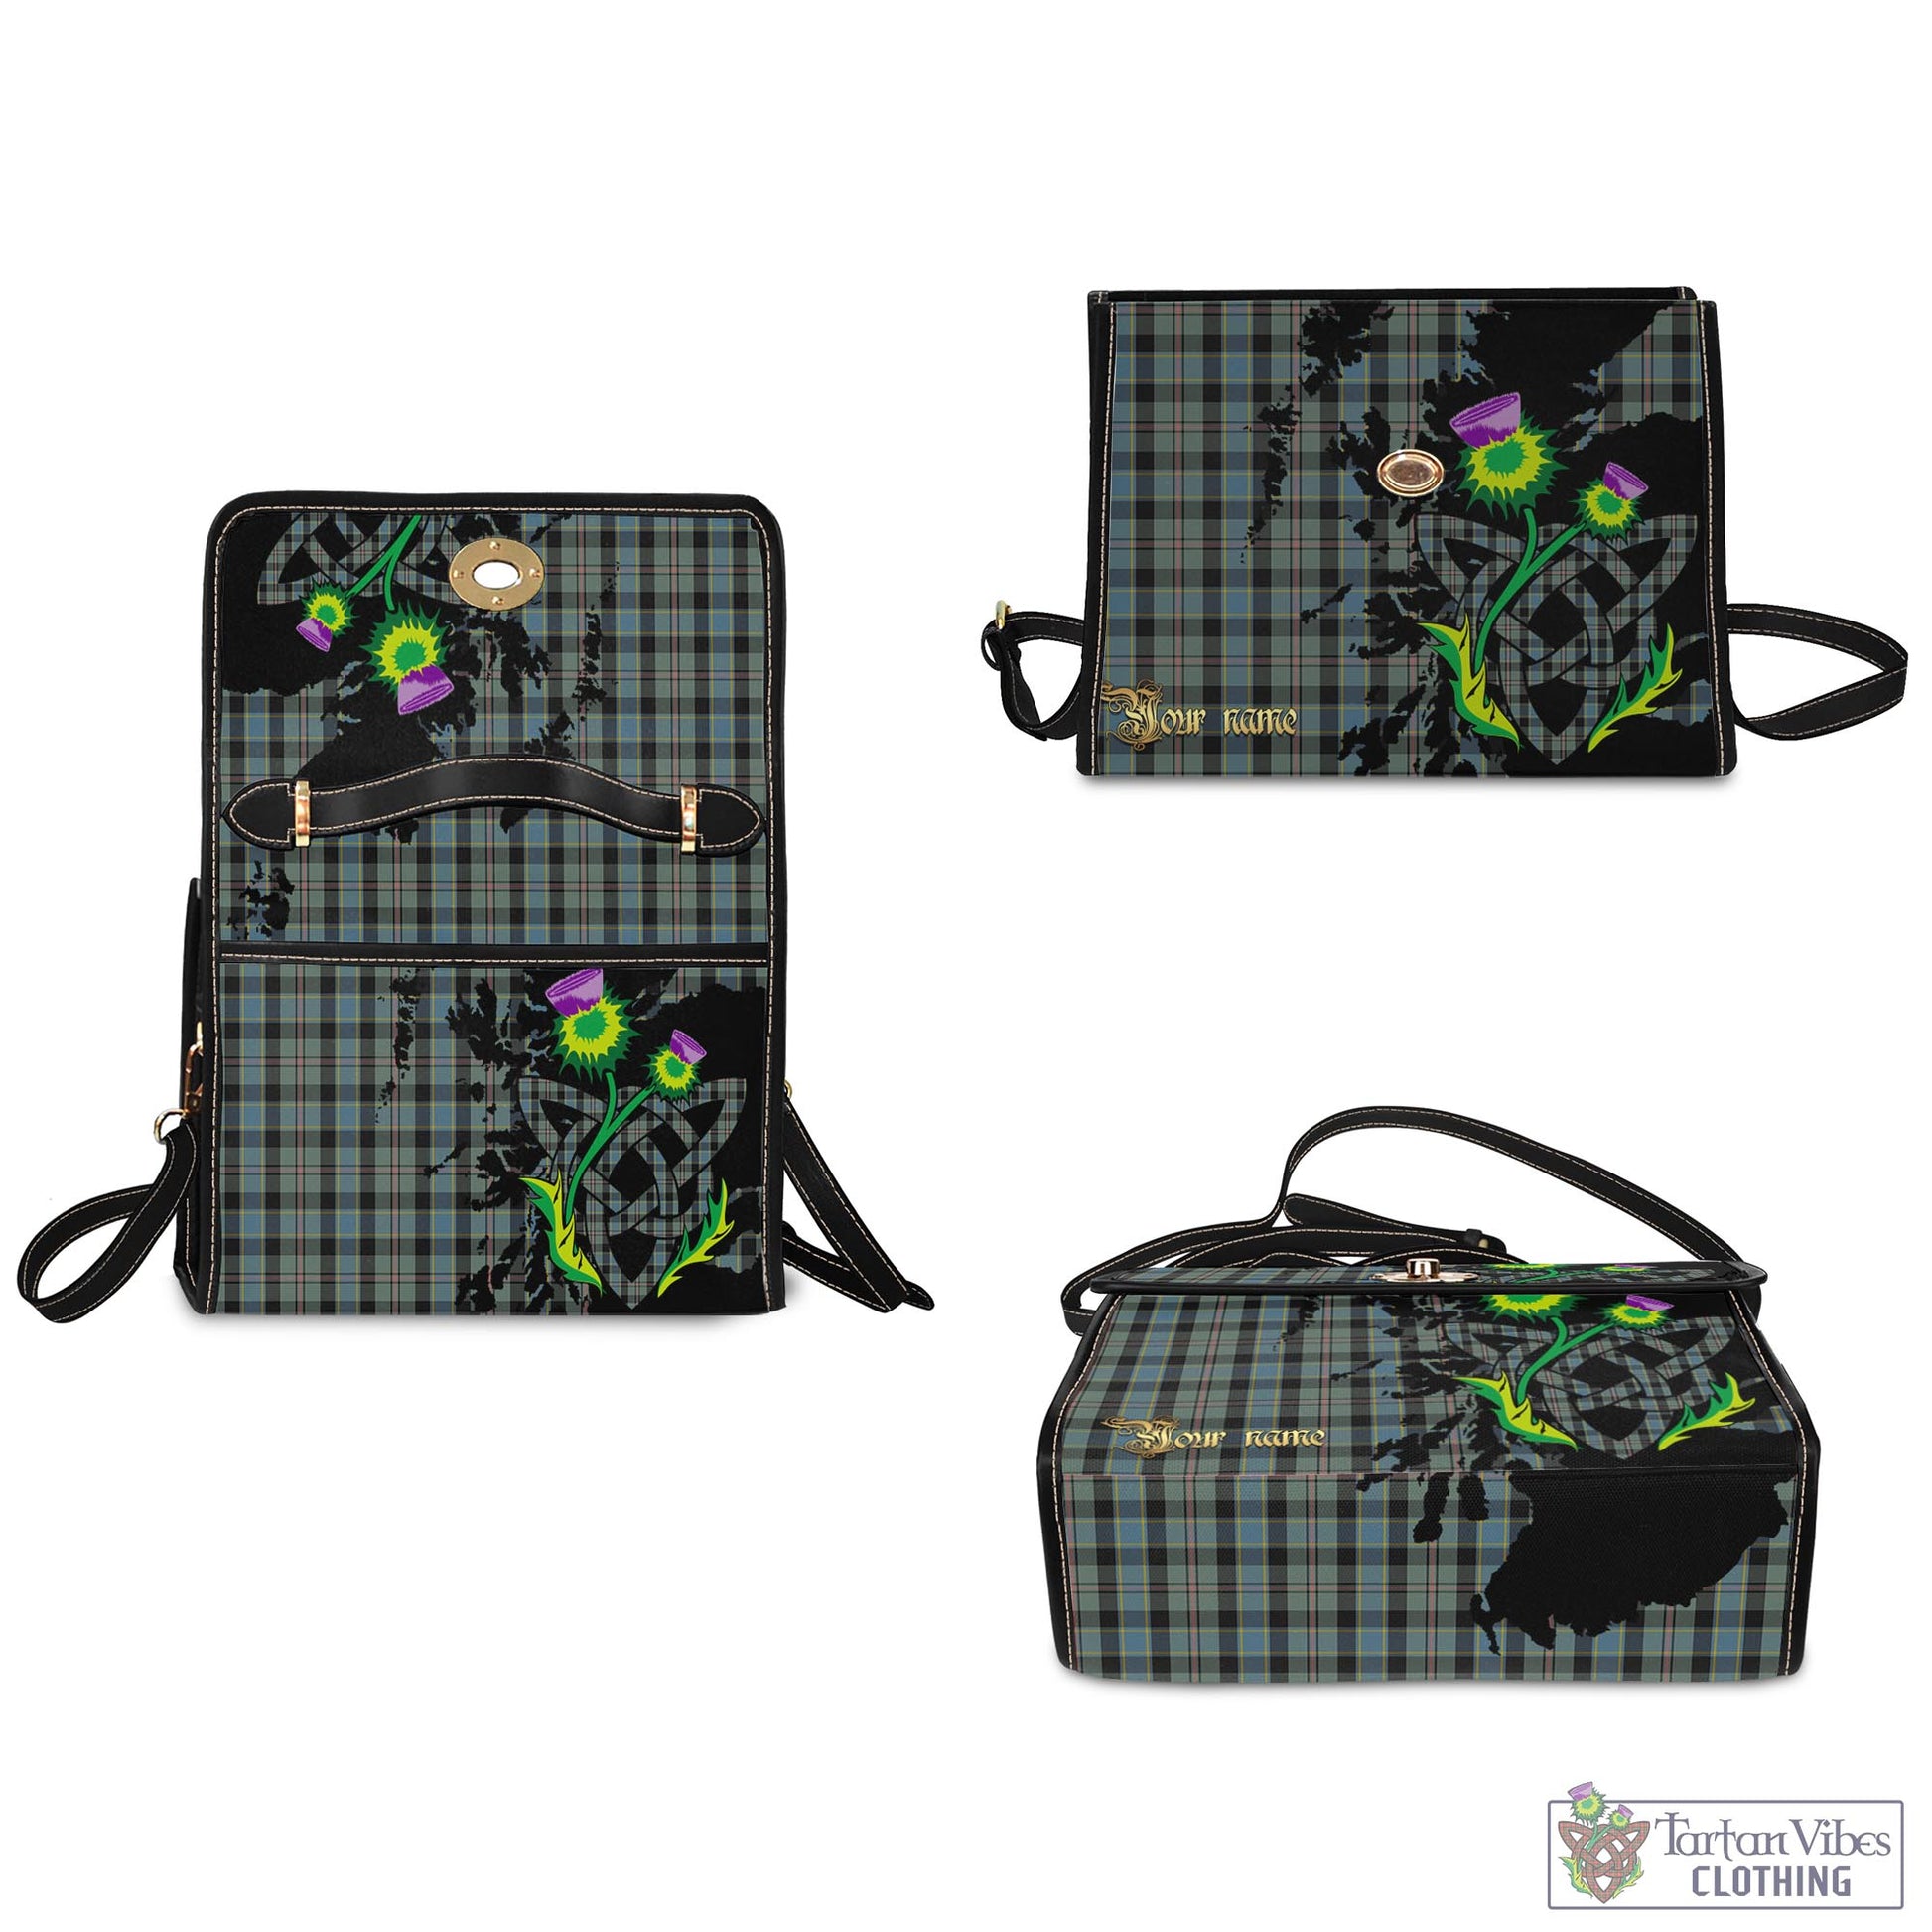 Tartan Vibes Clothing Ogilvie (Ogilvy) Hunting Tartan Waterproof Canvas Bag with Scotland Map and Thistle Celtic Accents